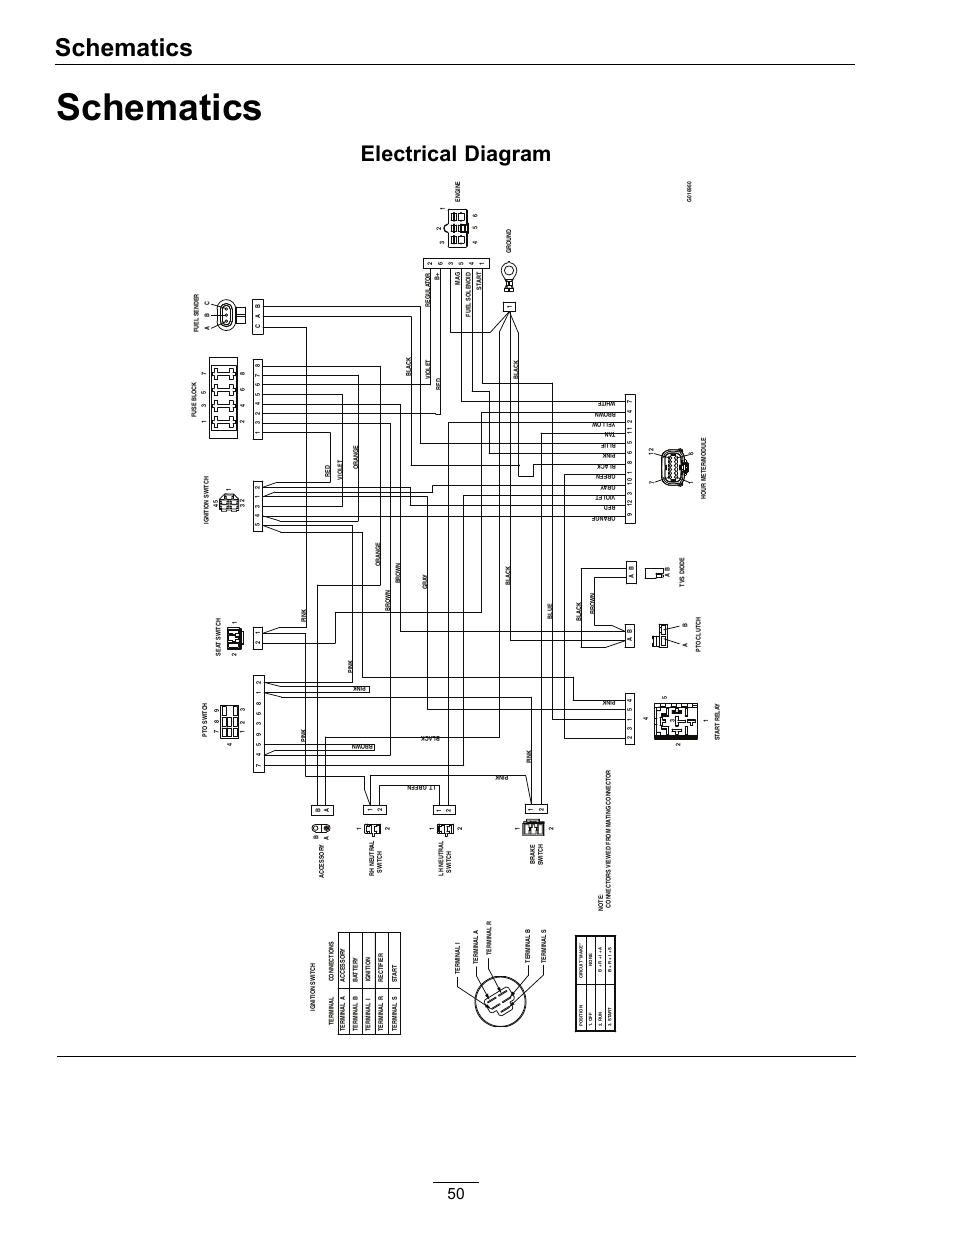 sprint moped wiring diagram